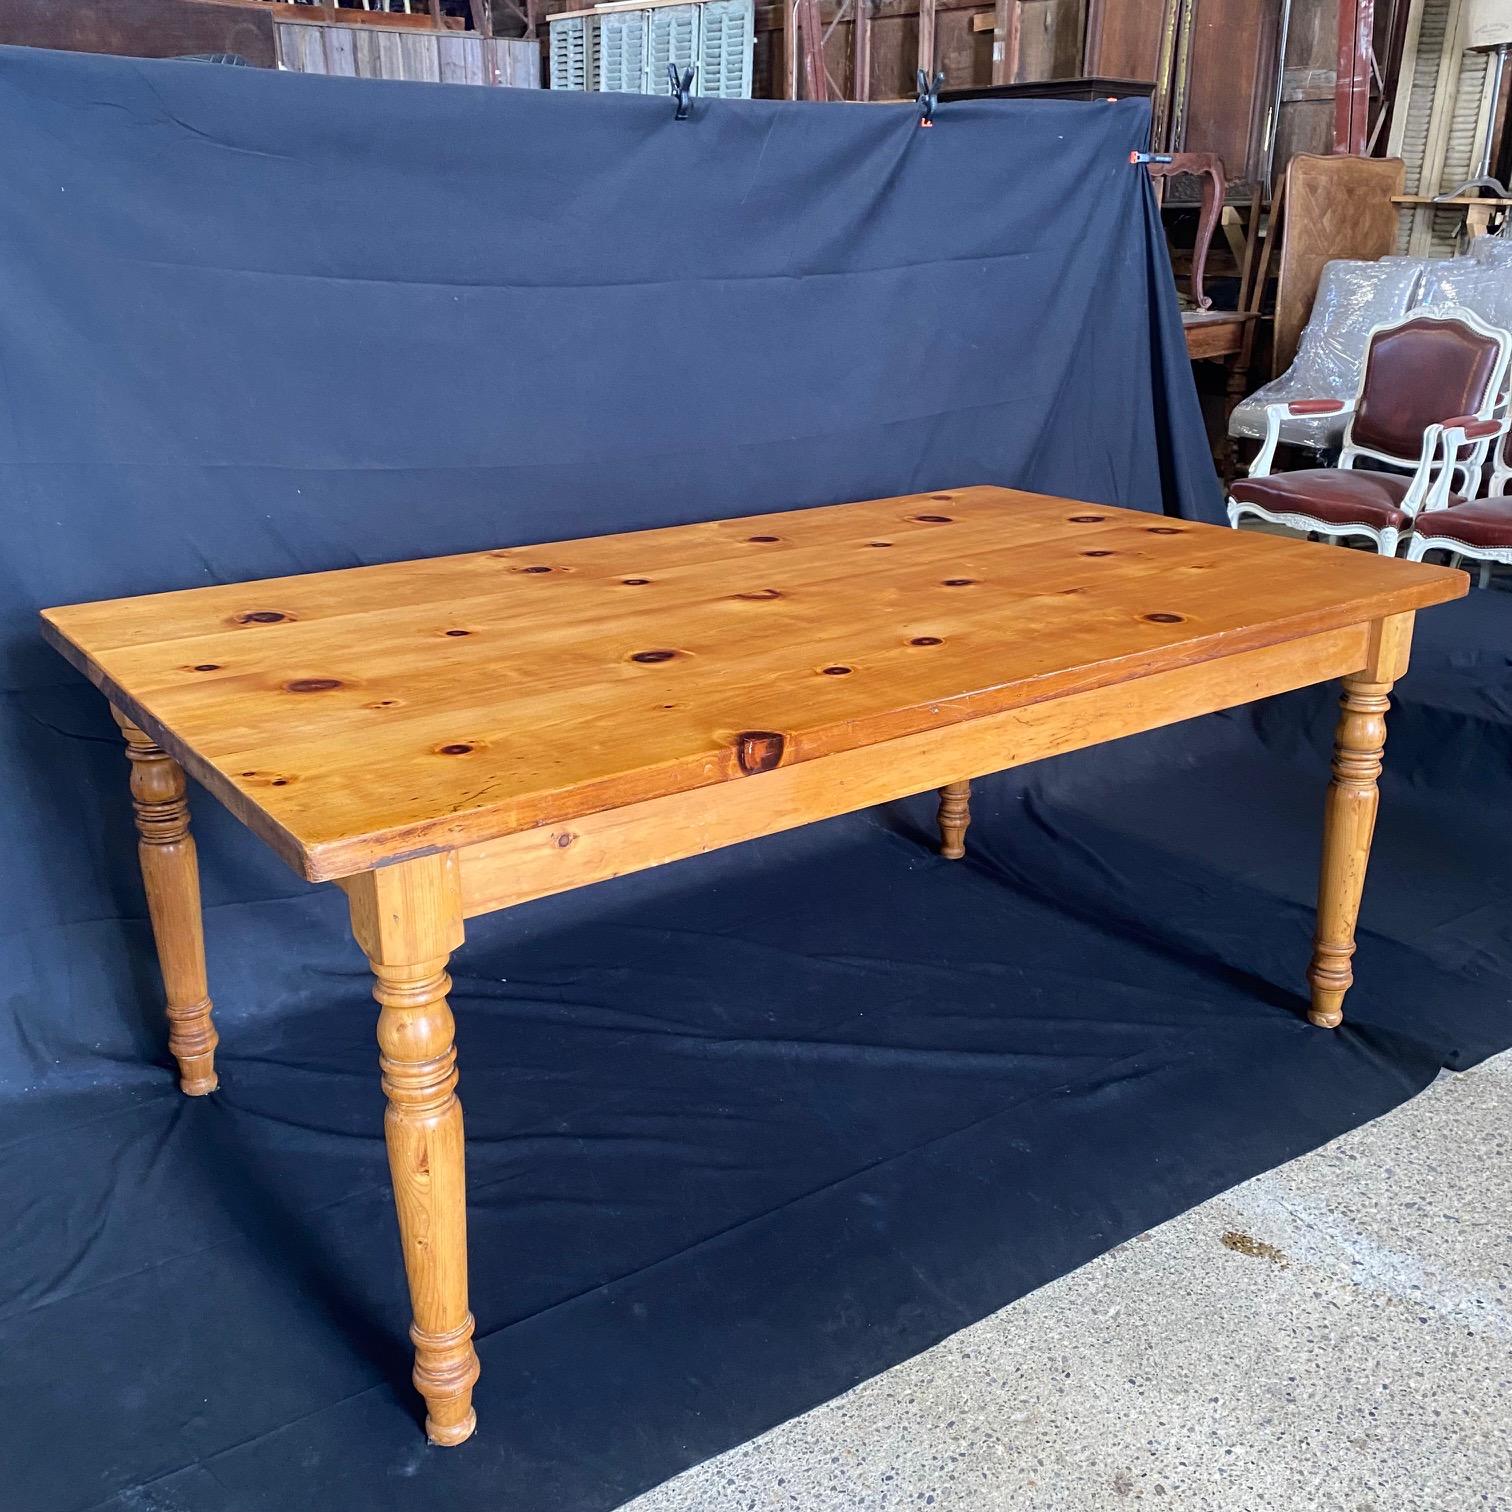 Charming 19th century pine country English farmhouse dining table having a rectangular top with molded edge and a beautifully worn and weathered top. The table measures nearly 26 inches from the floor to the apron and is supported by lovely turned